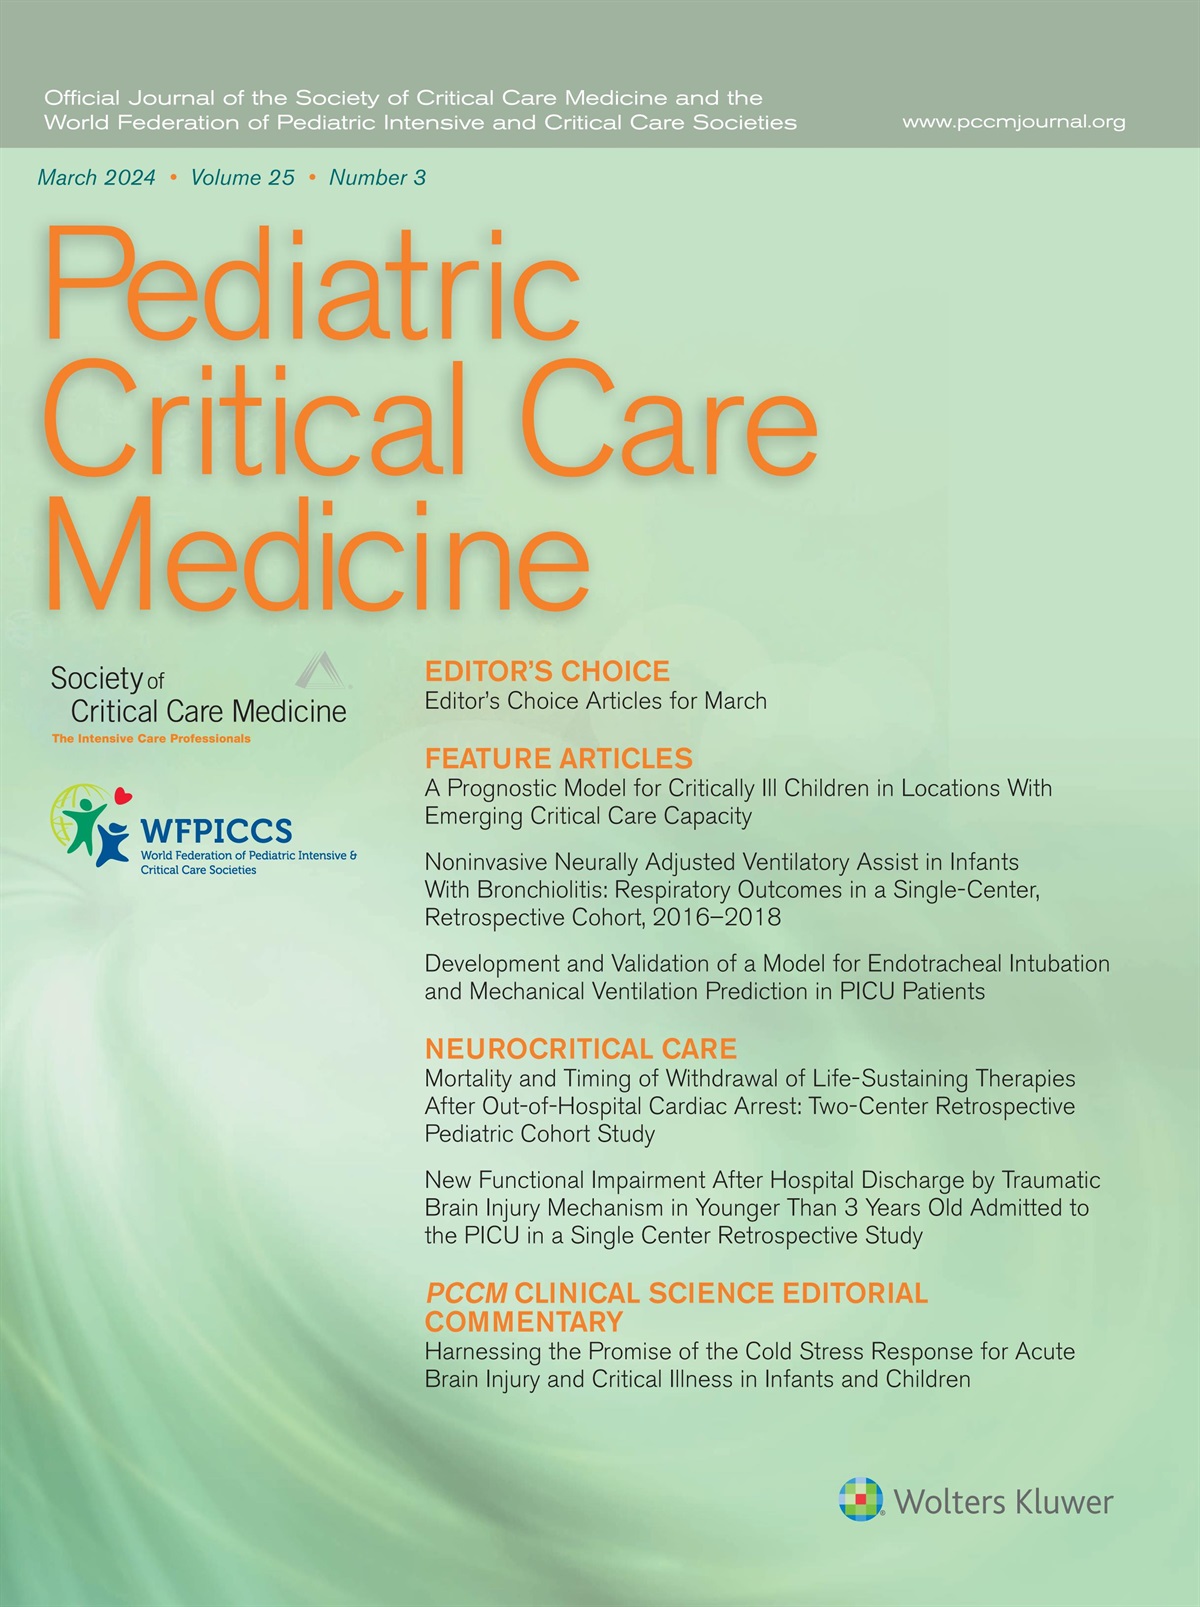 About Rewarming Young Children After Drowning-Associated Hypothermia and Out-of-Hospital Cardiac Arrest